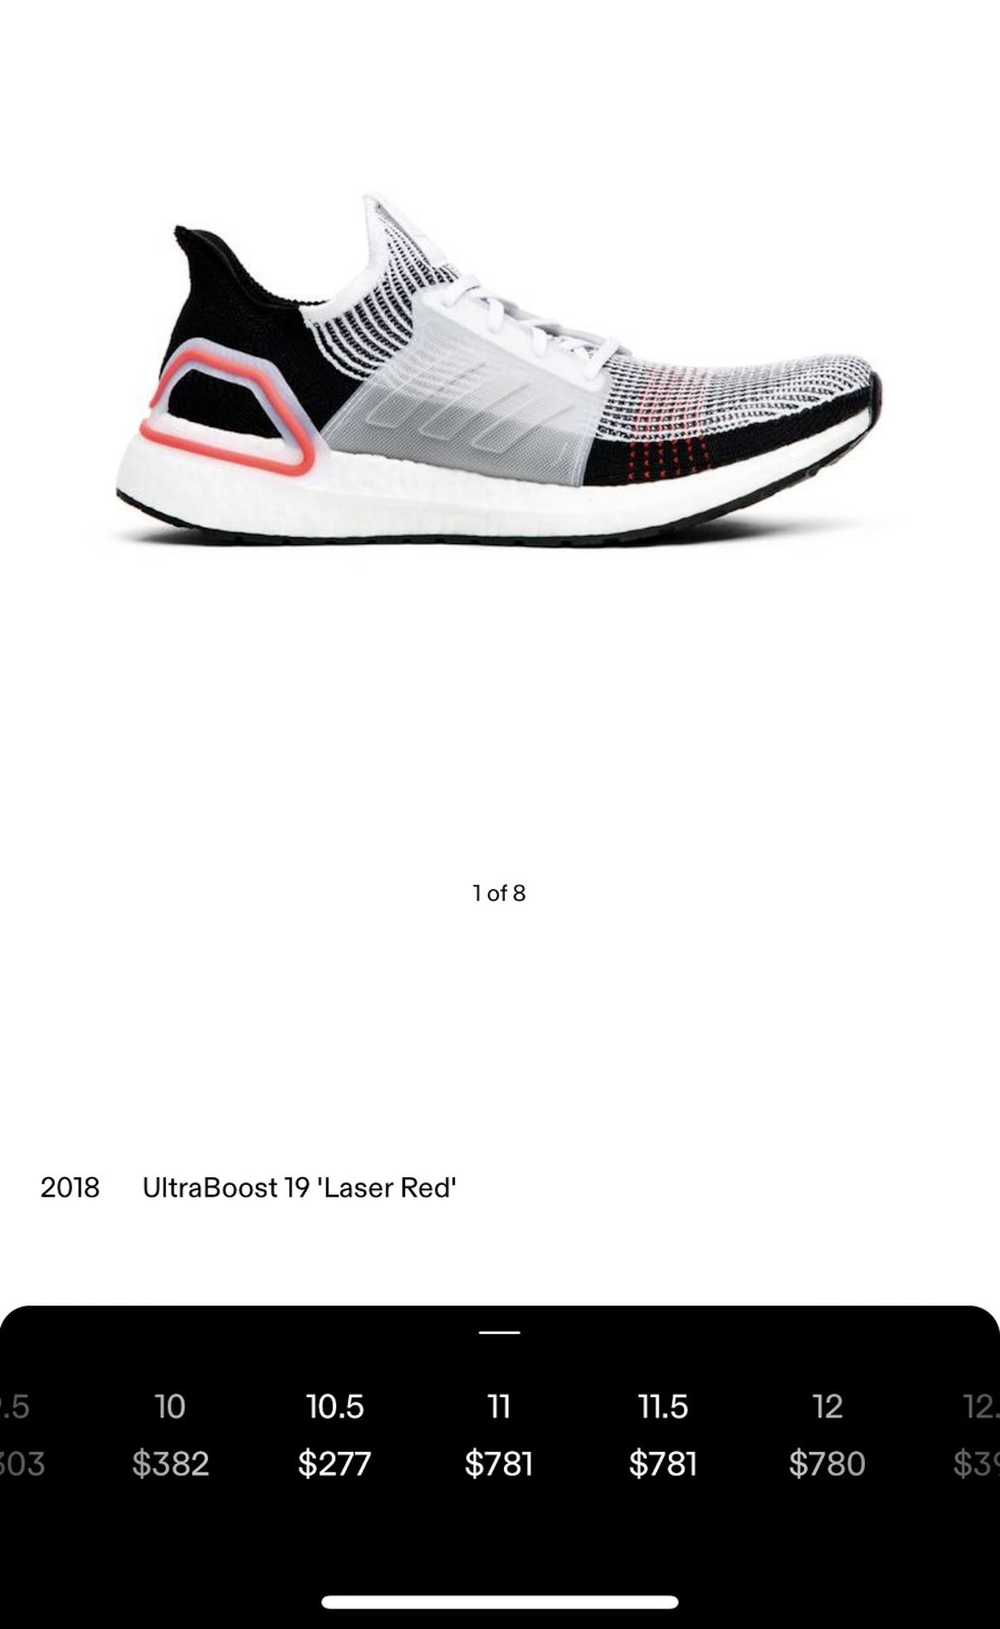 Adidas UltraBoost 19 'Laser Red' - image 1